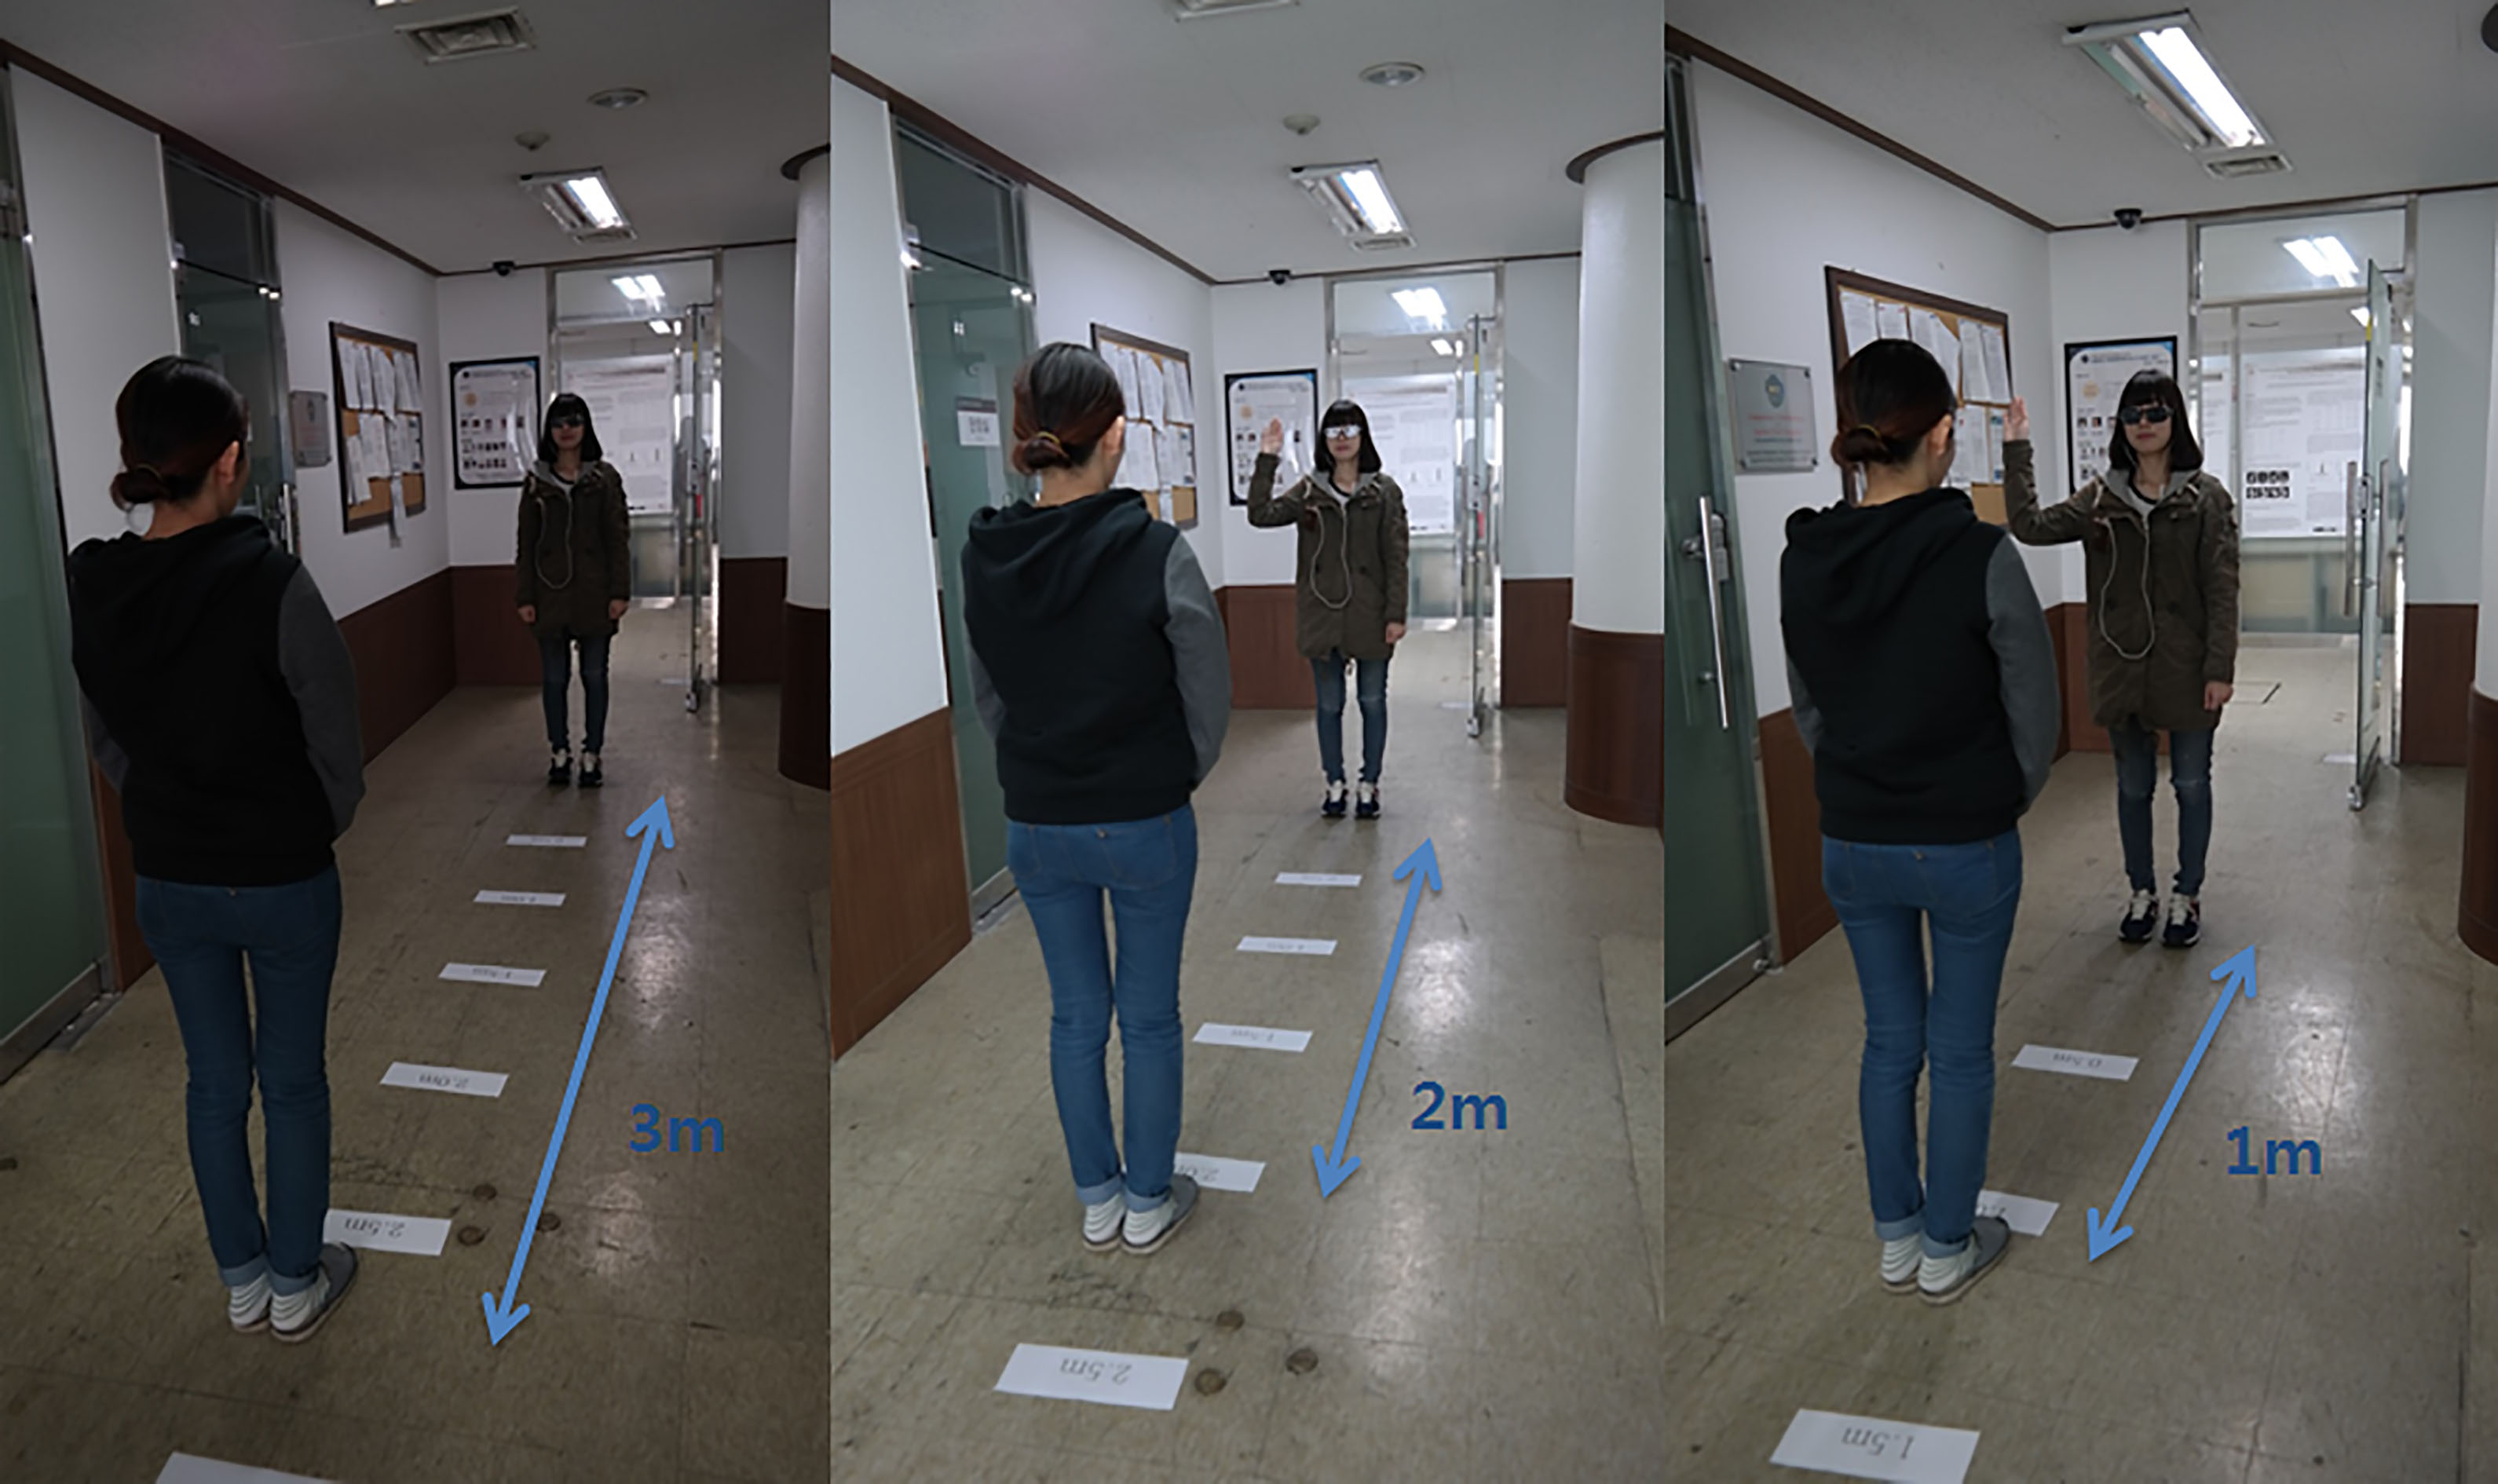 Experiment to determine distance from 50 cm to 3 m while wearing Visual System.